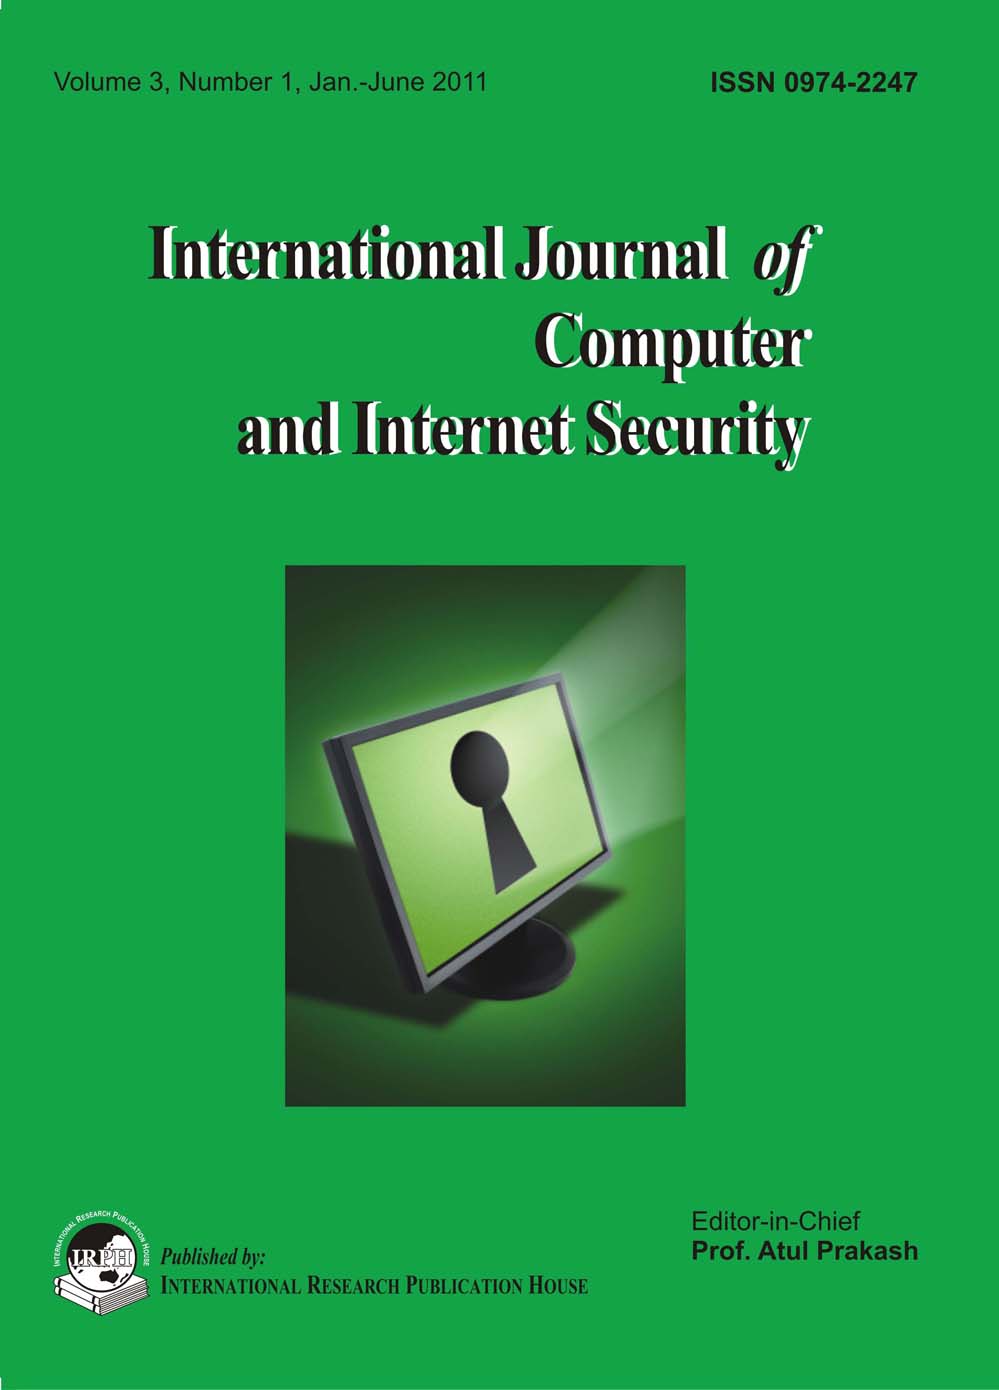 International Journal of Computer and Internet Security